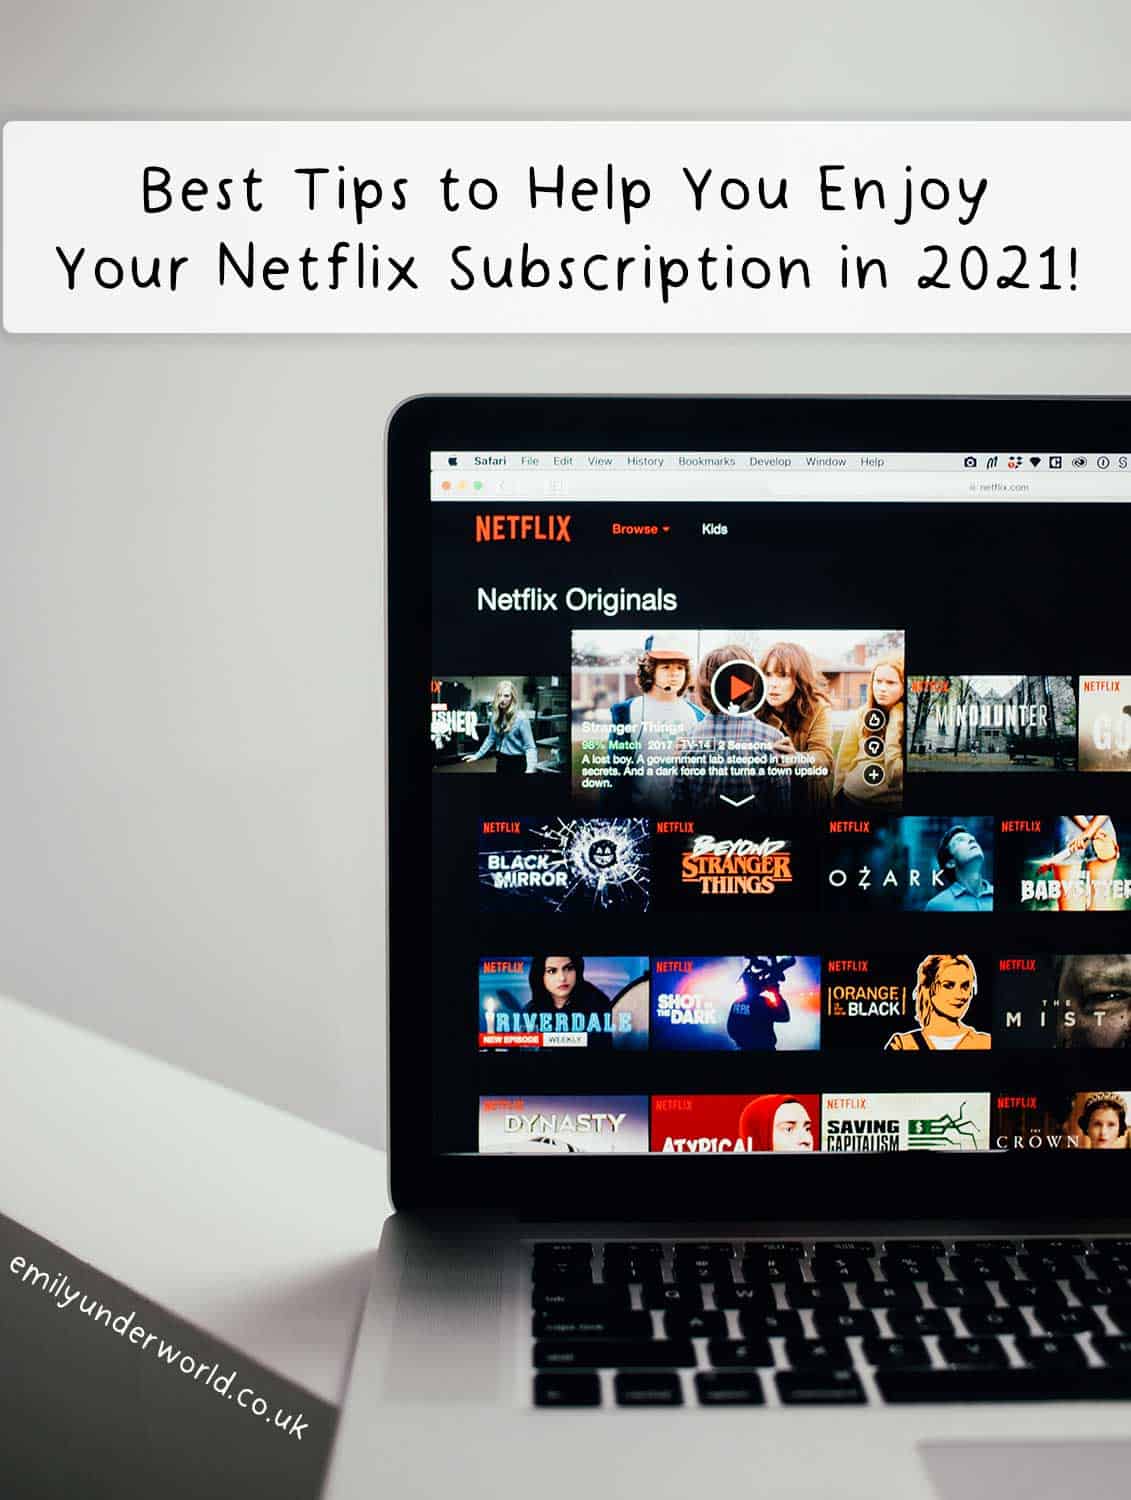 Best Tips To Help You Enjoy Your Netflix Subscription in 2021